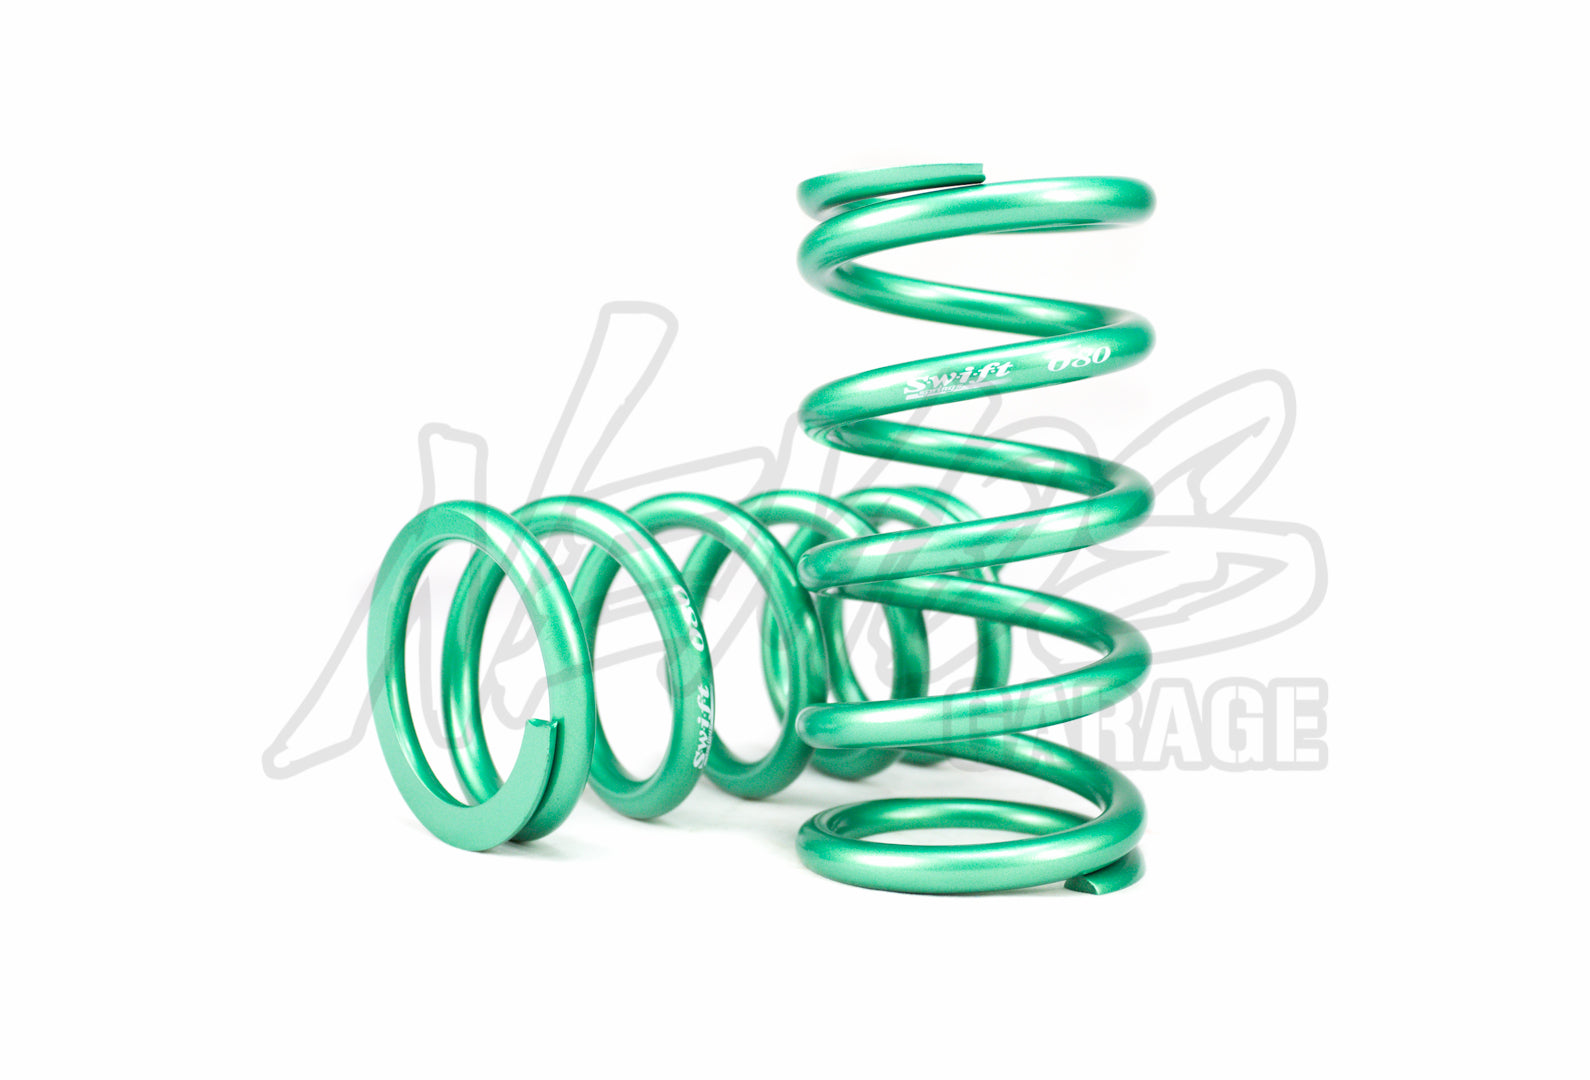 Swift Metric Coilover Springs ID 70MM (2.76") - 10" Length - Honda/Acura Applications